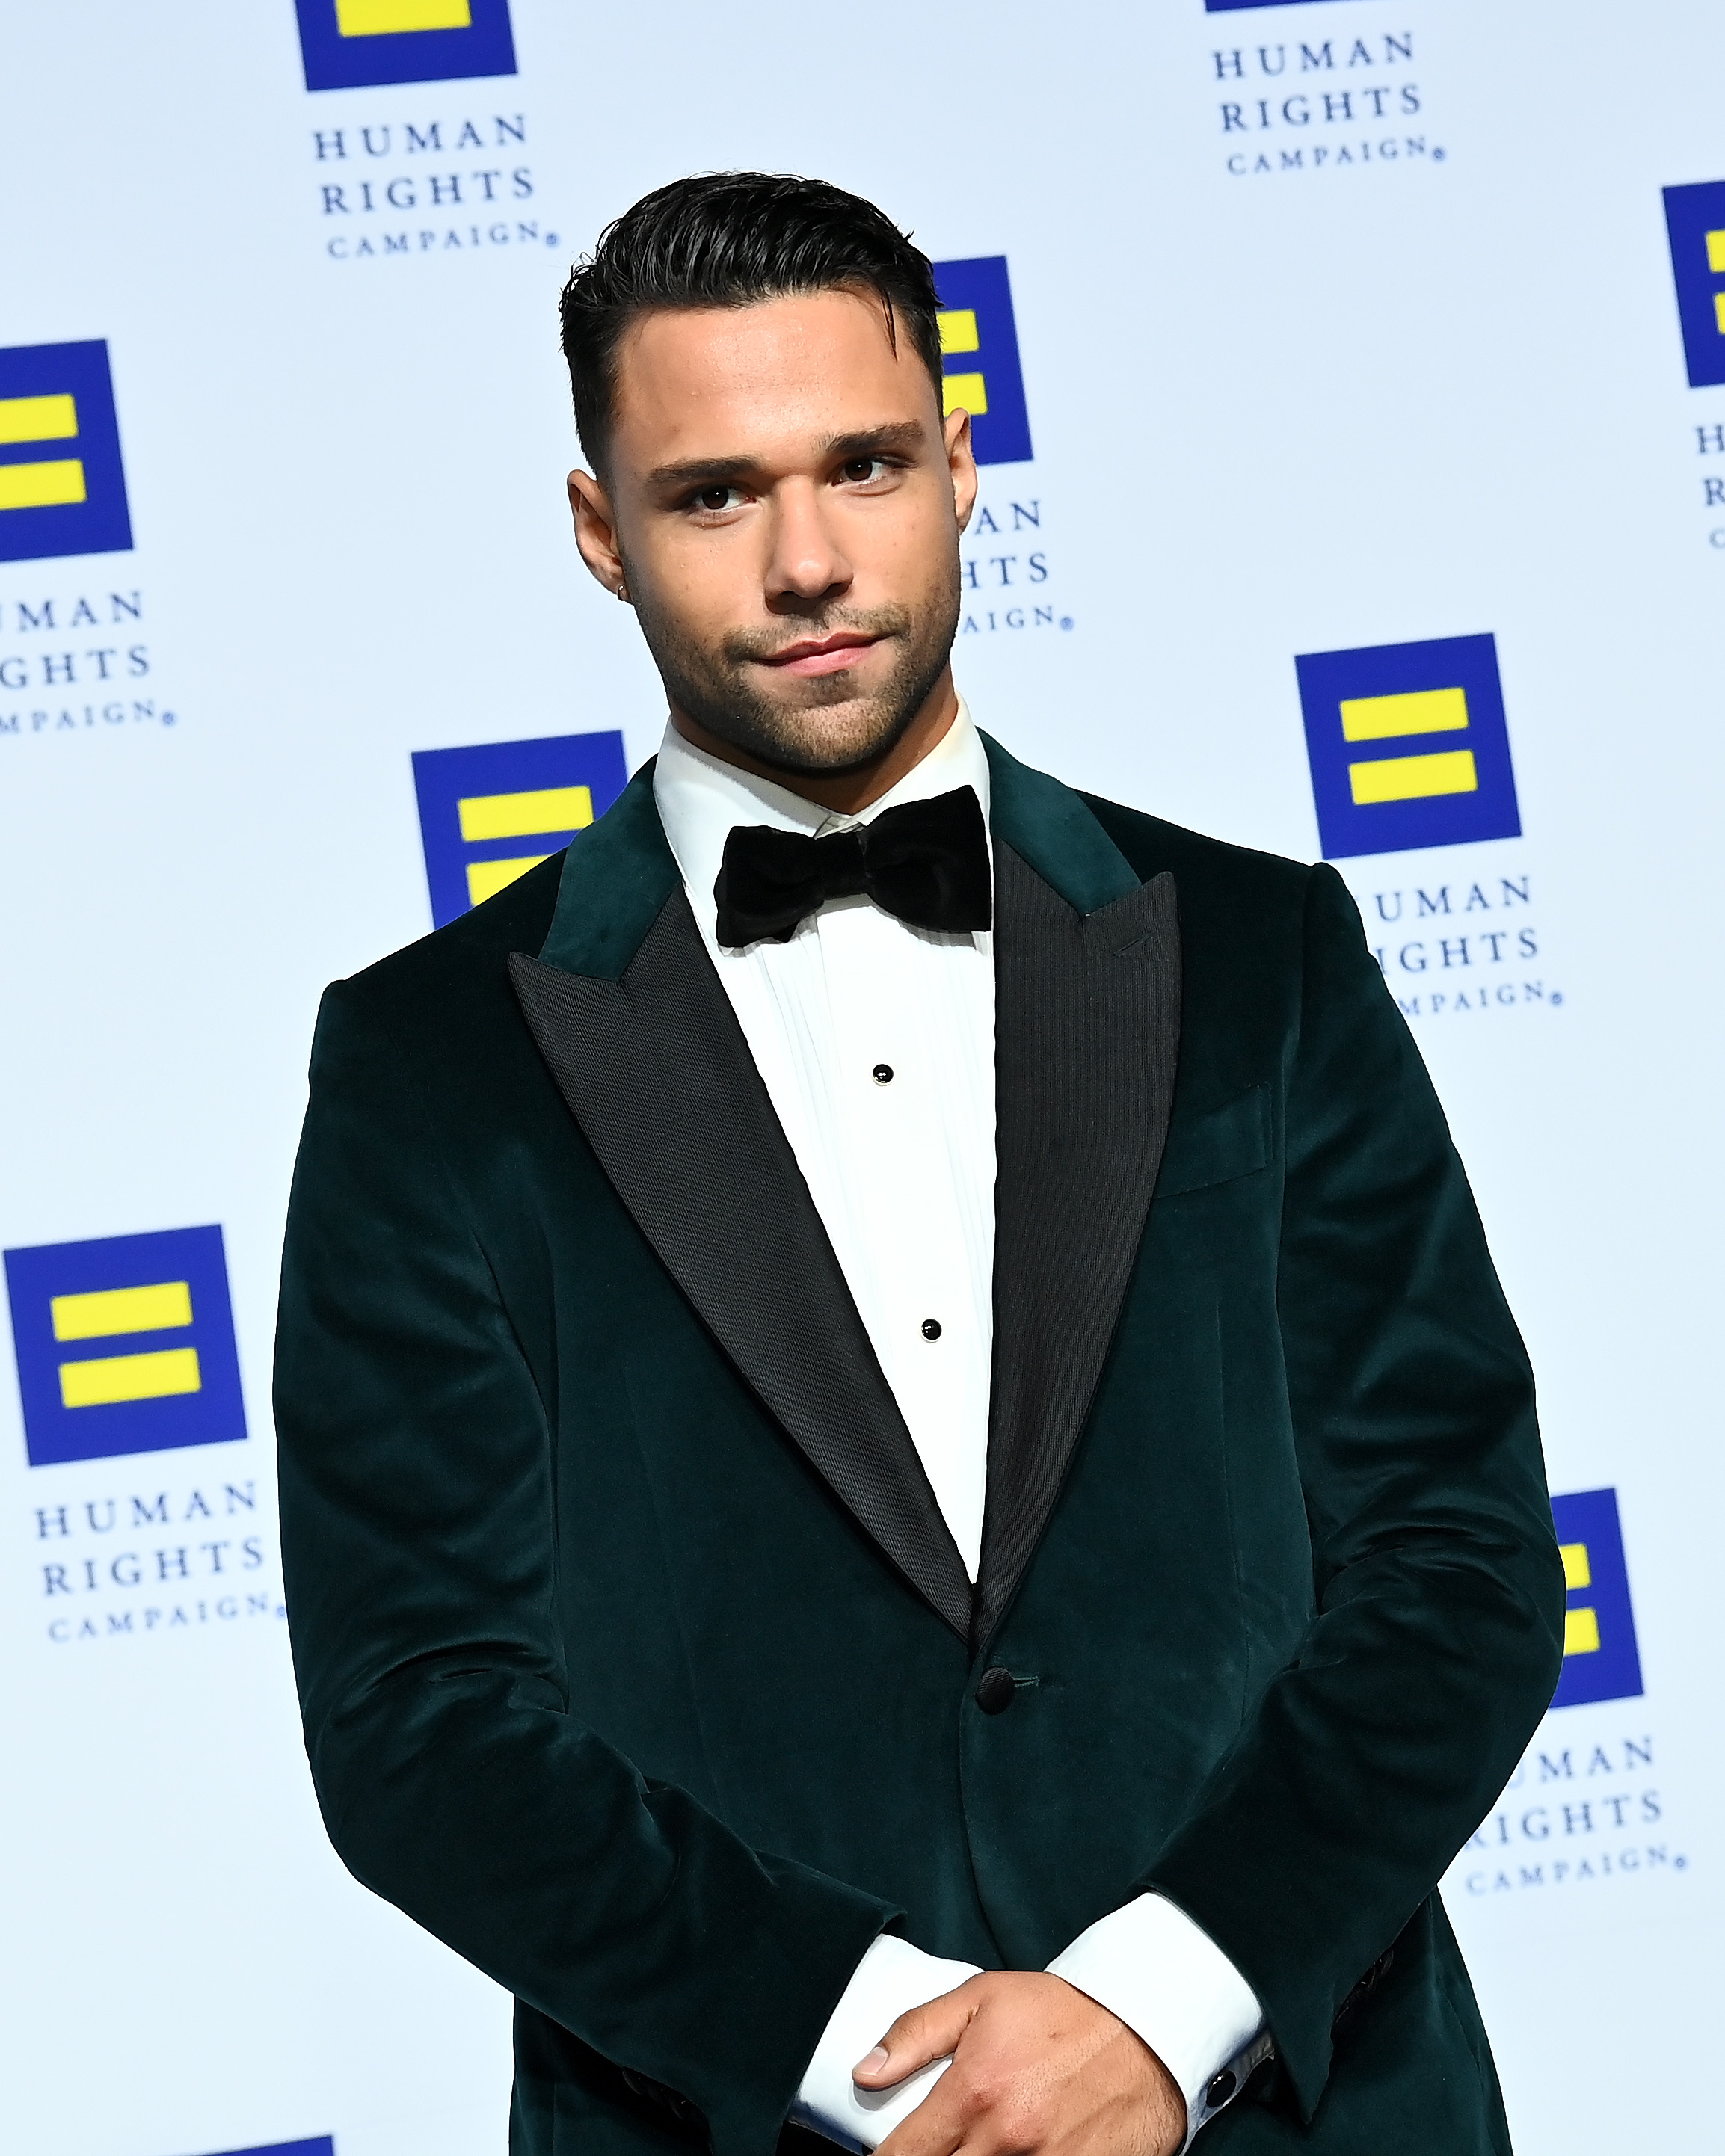 Rafael L. Silva at the 2022 Human Rights Campaign National Dinner on October 29, 2022, in Washington, DC | Source: Getty Images